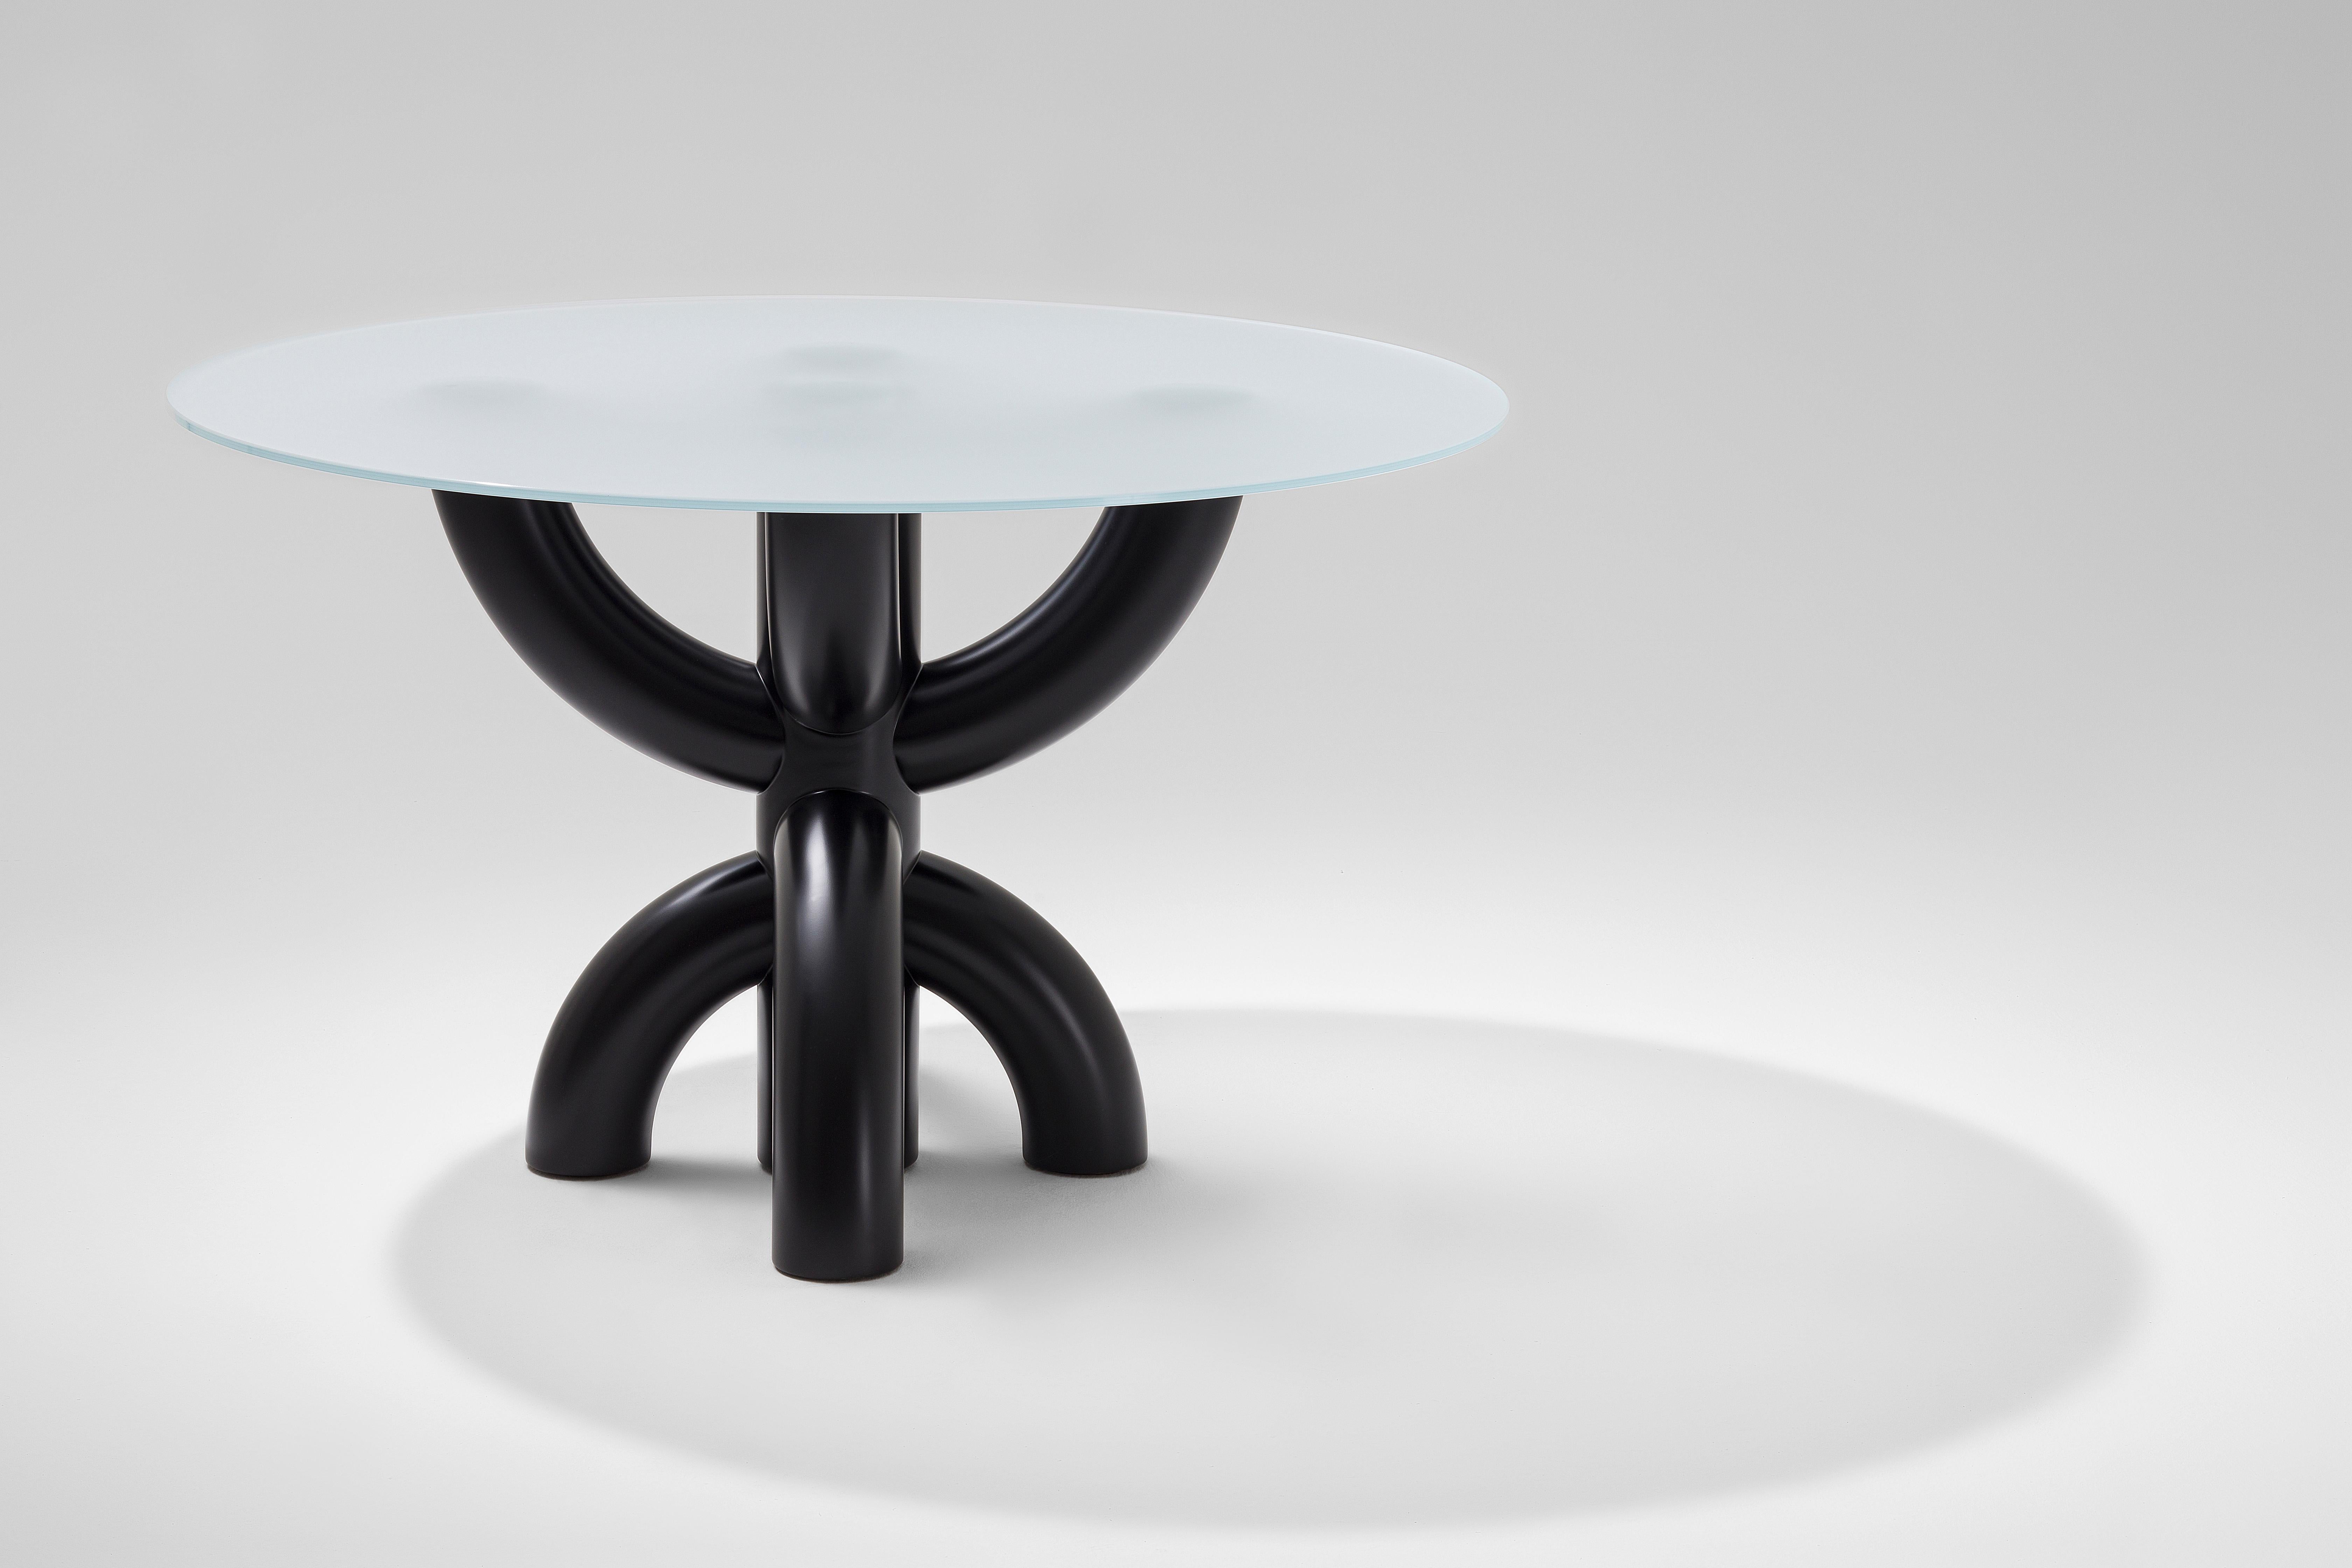 Bold table by Tolga Sencer
Dimensions: 130 x 130 x 85 cm
Materials: black lacquer wood, satin glass over wood top

In Bold collection, bodies have strong symmetrical structures. Rotations of thick and broad elliptic lines on a single axis